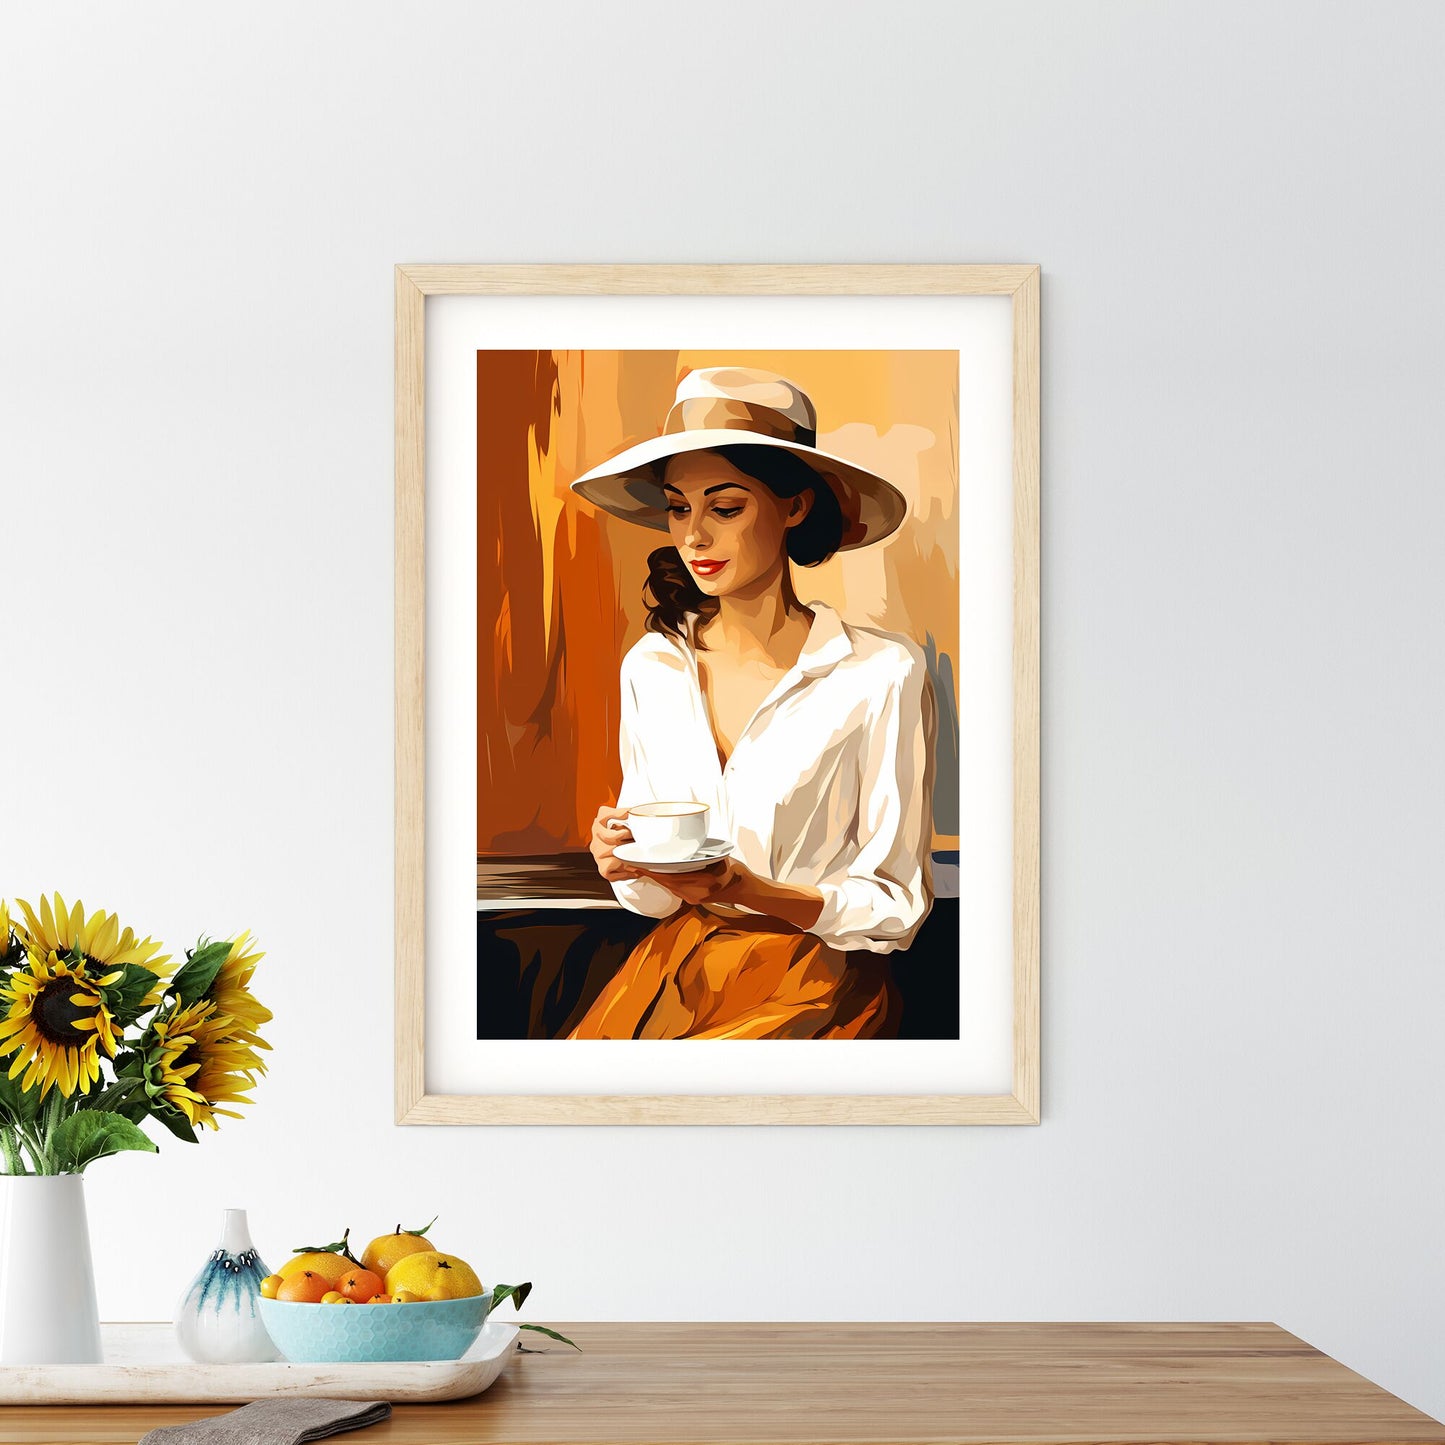 Woman In A Hat Holding A Cup Art Print Default Title